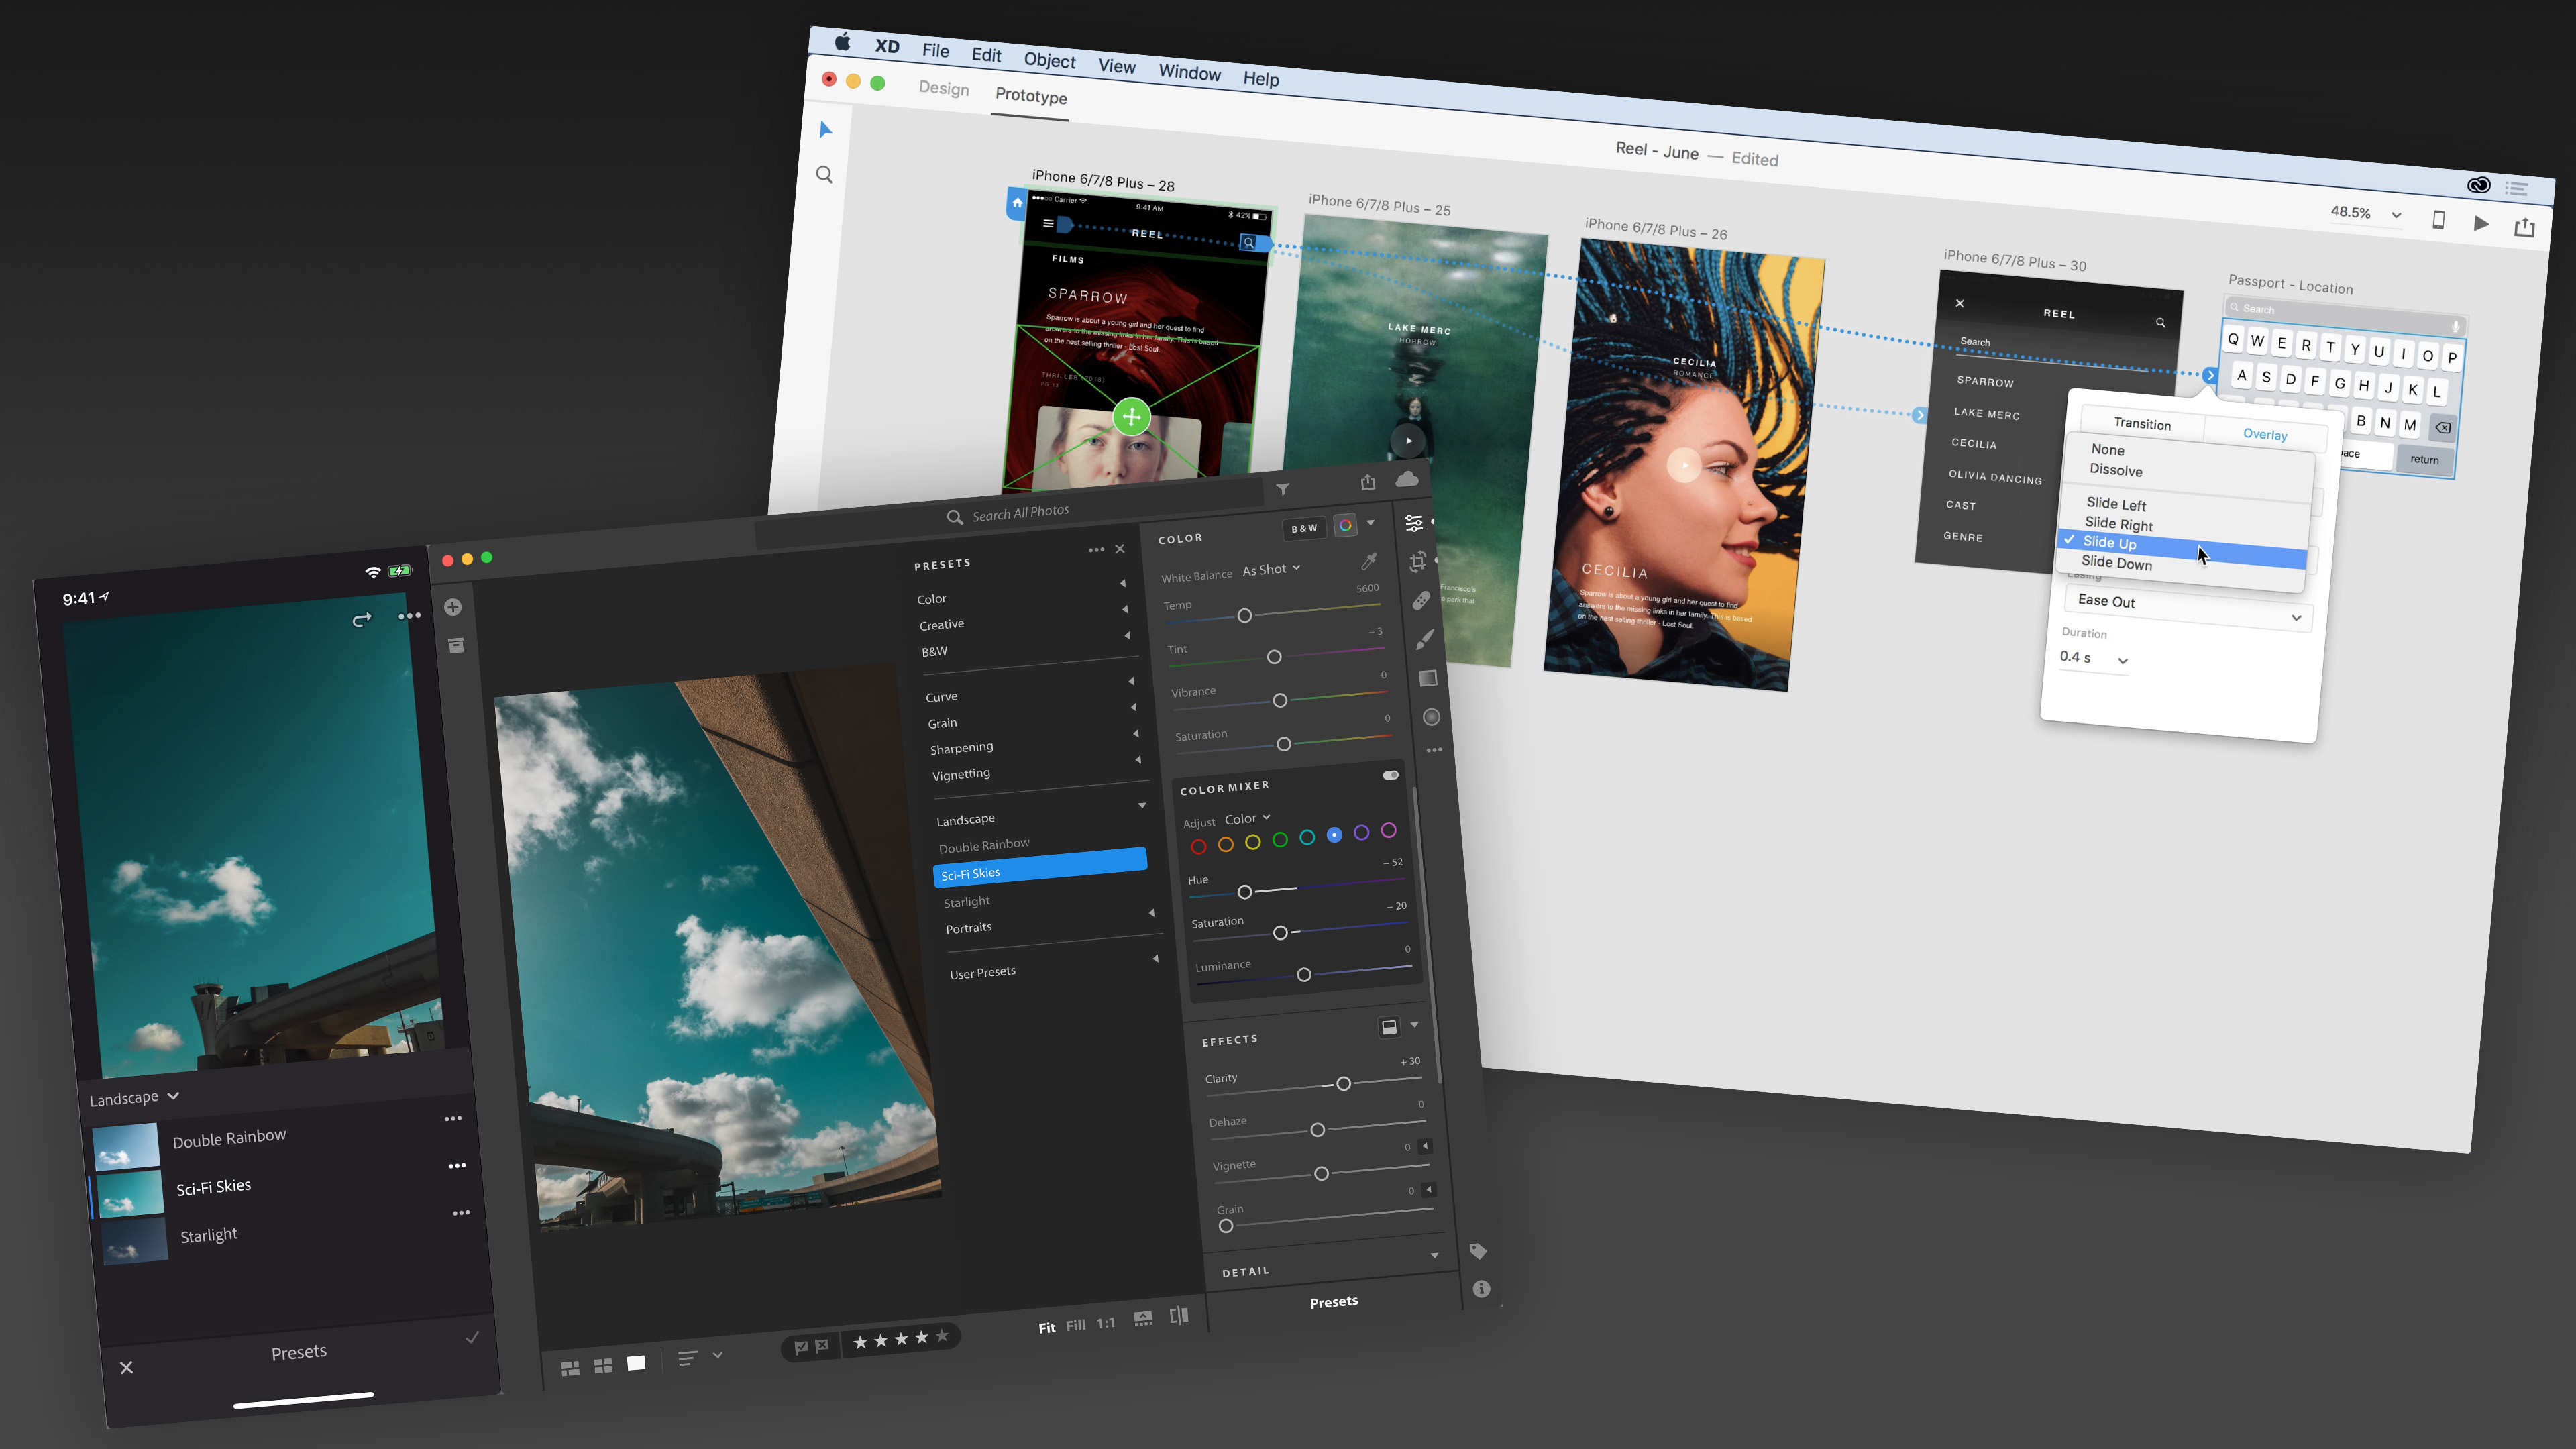 adobe xd for mac download